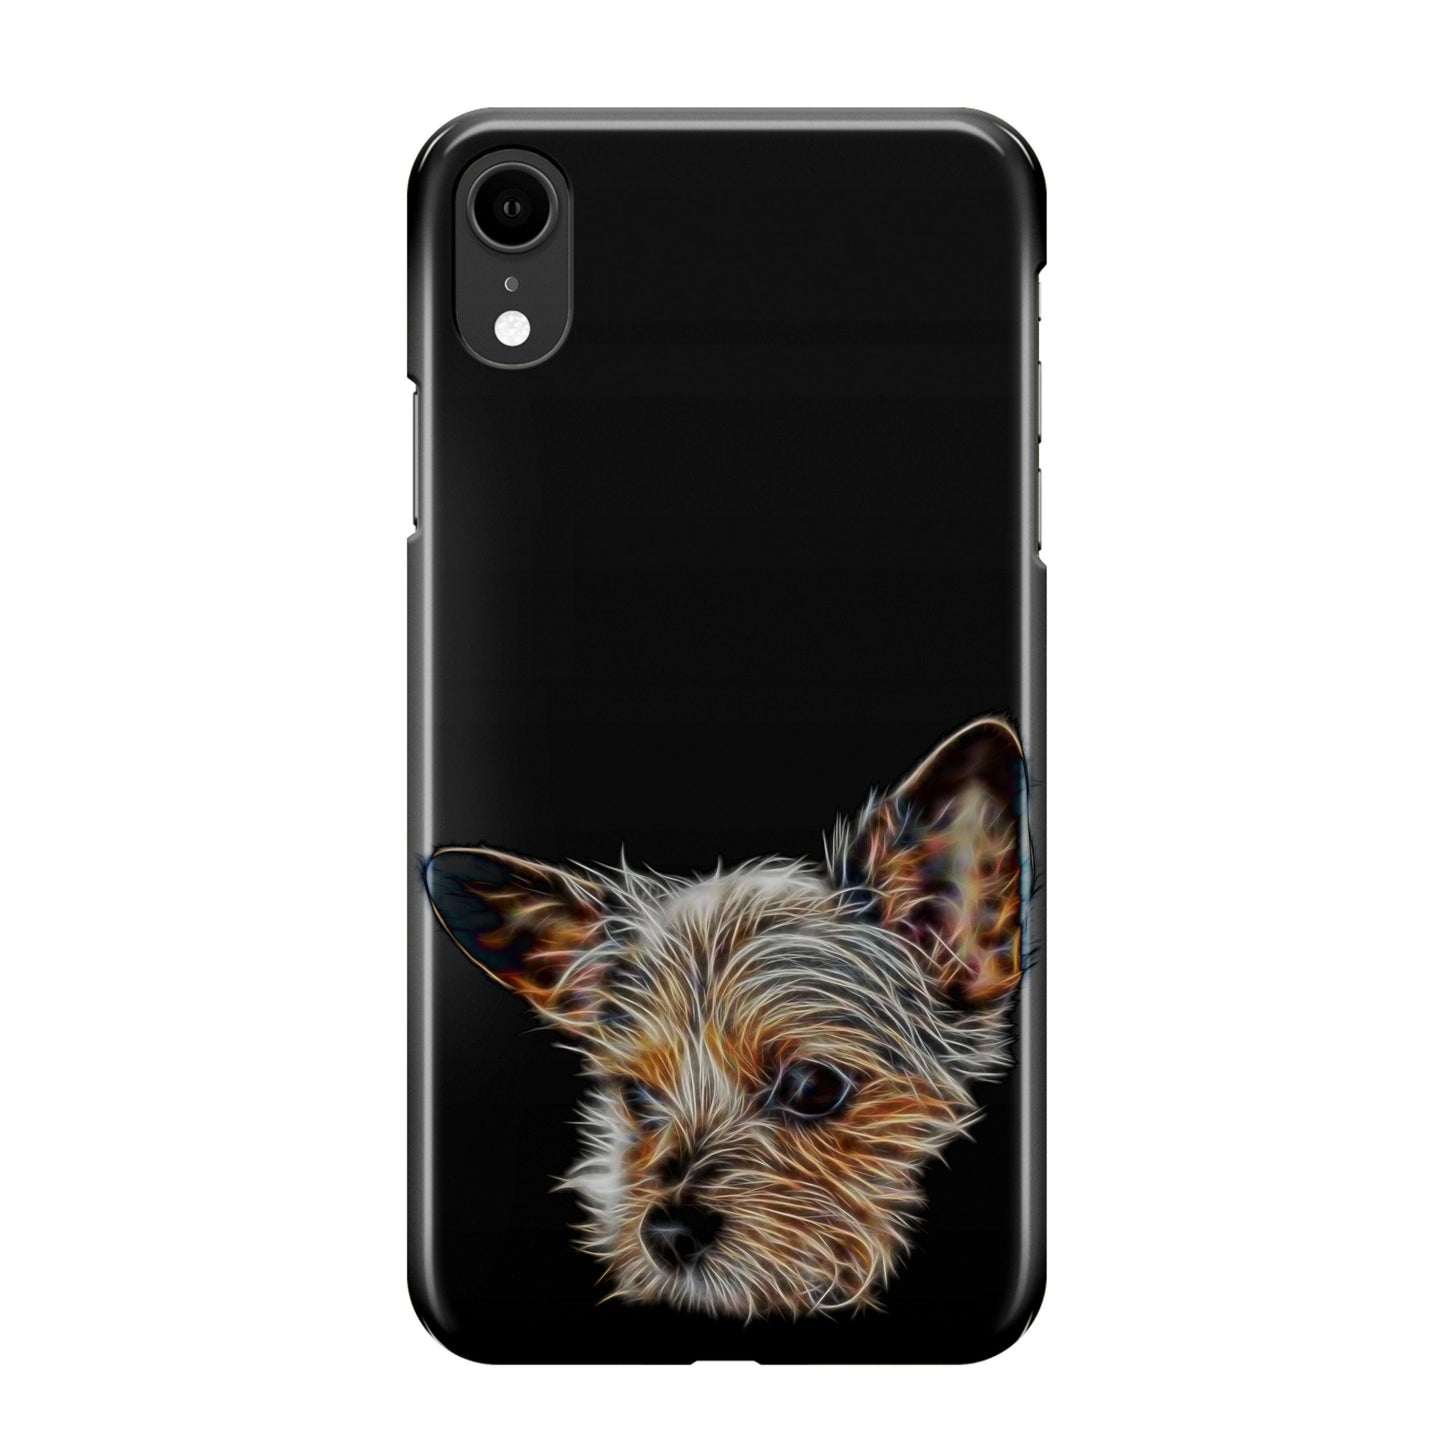 Chorkie Phone Cases with Stunning Fractal Art Design. For Samsung or iPhone.